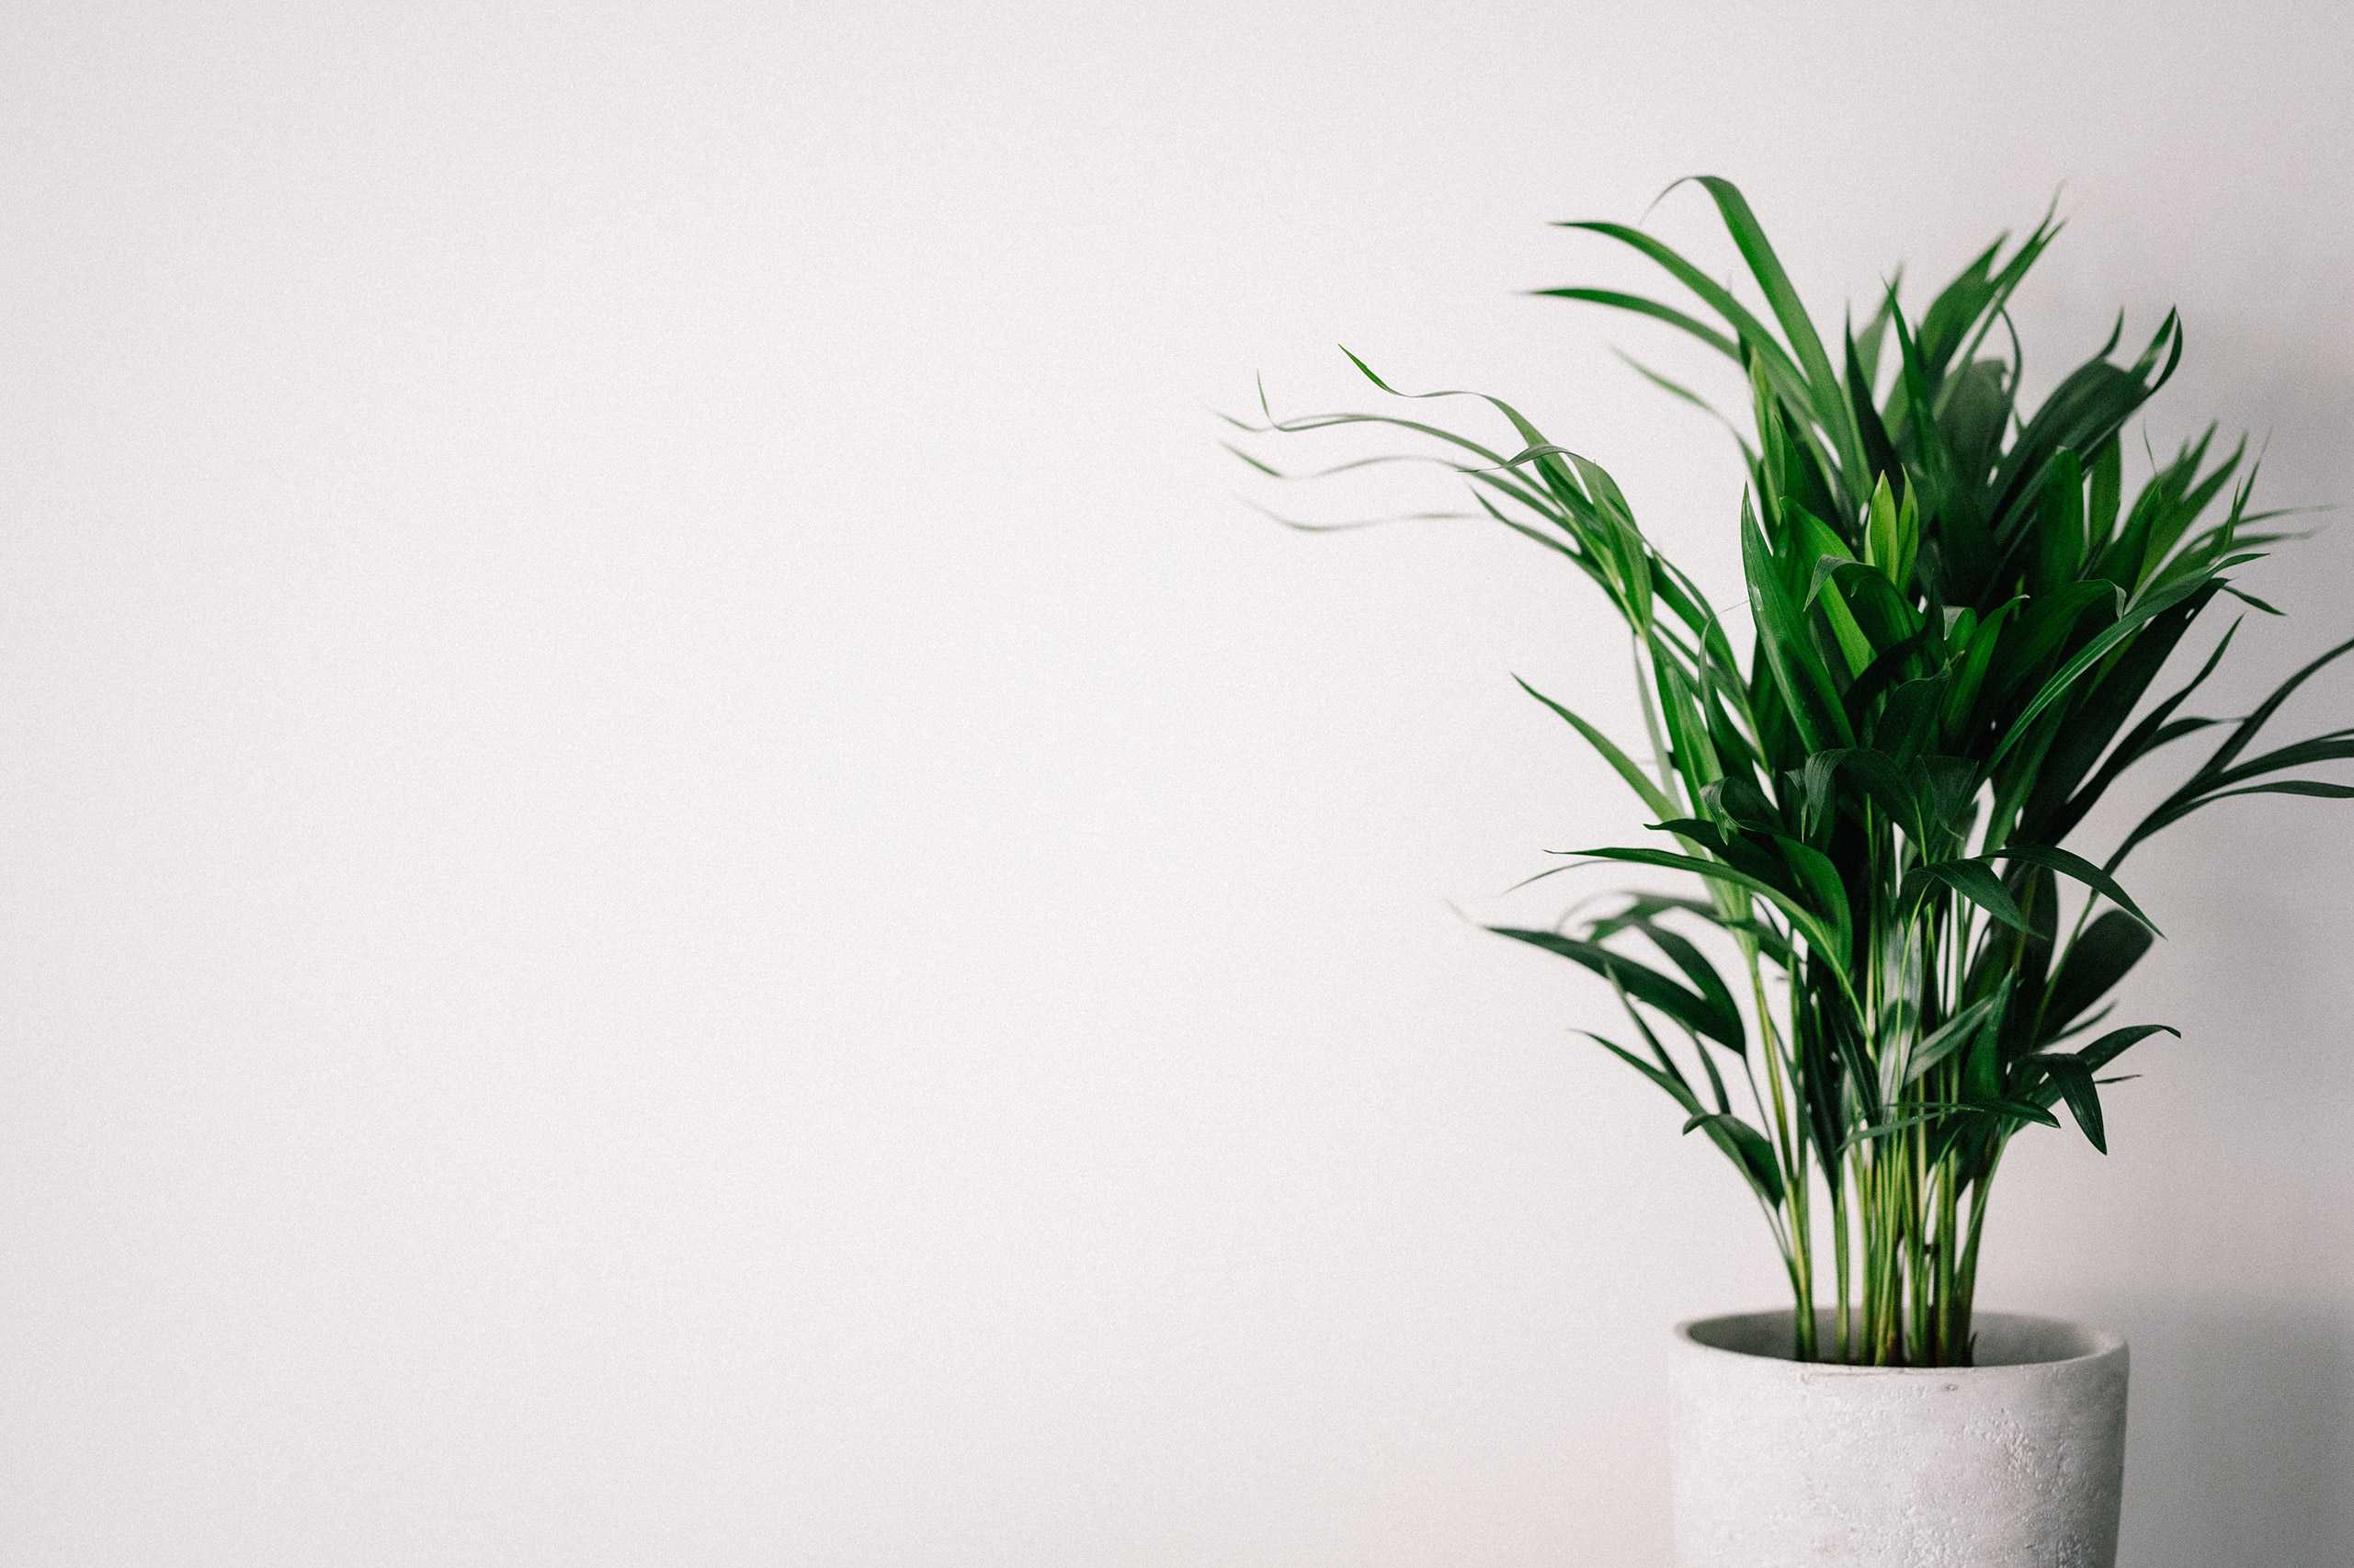 An indoor potted plant in front of a plain white wall